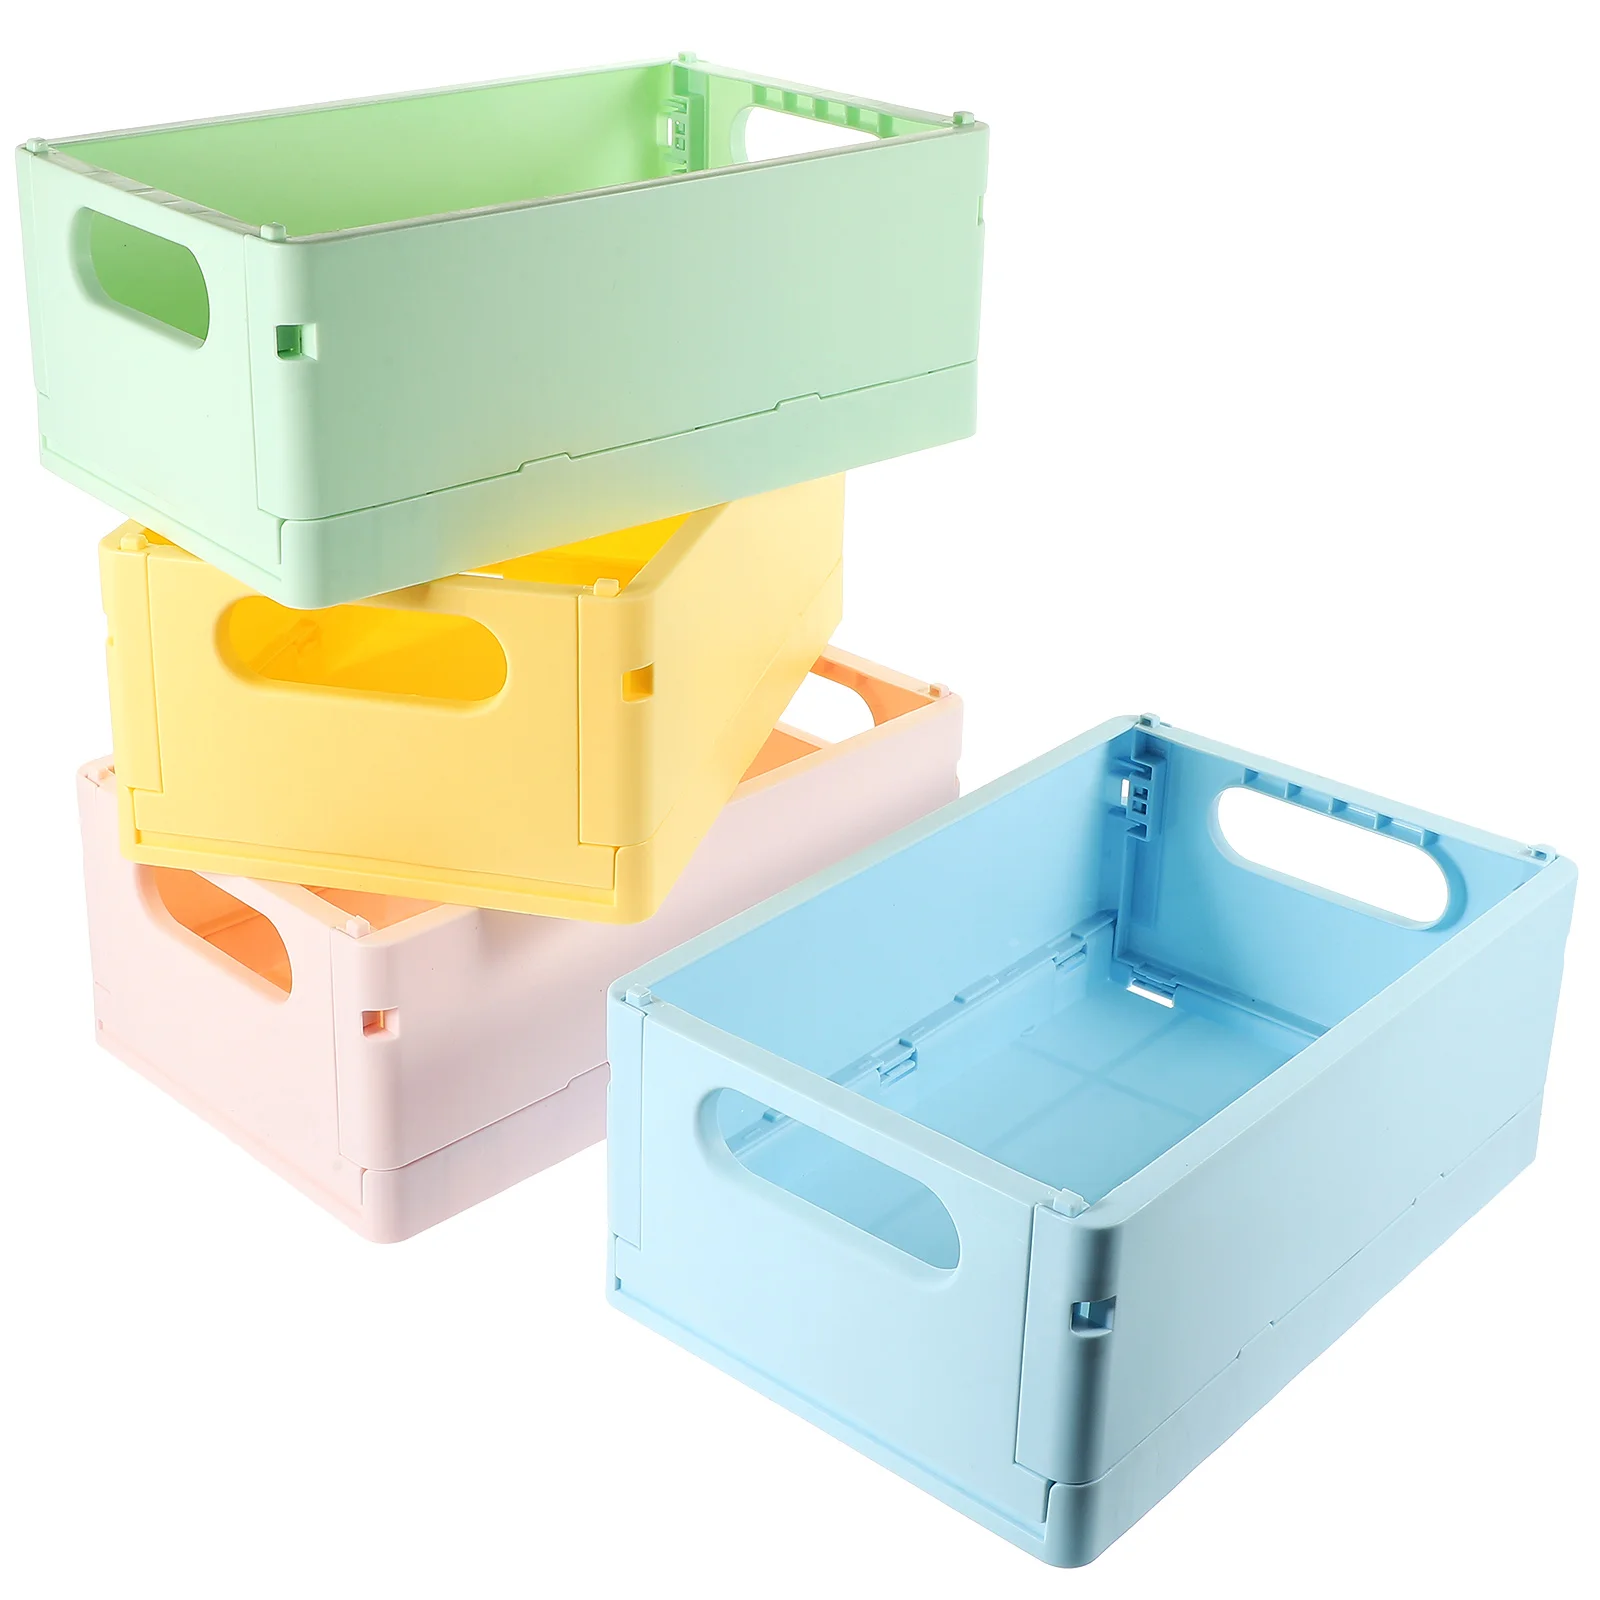 

Cute Storage Plastic Crate Home Use Sundries Organizers Collapsible Women Cosmetics Tabletop Desk Bins Containers